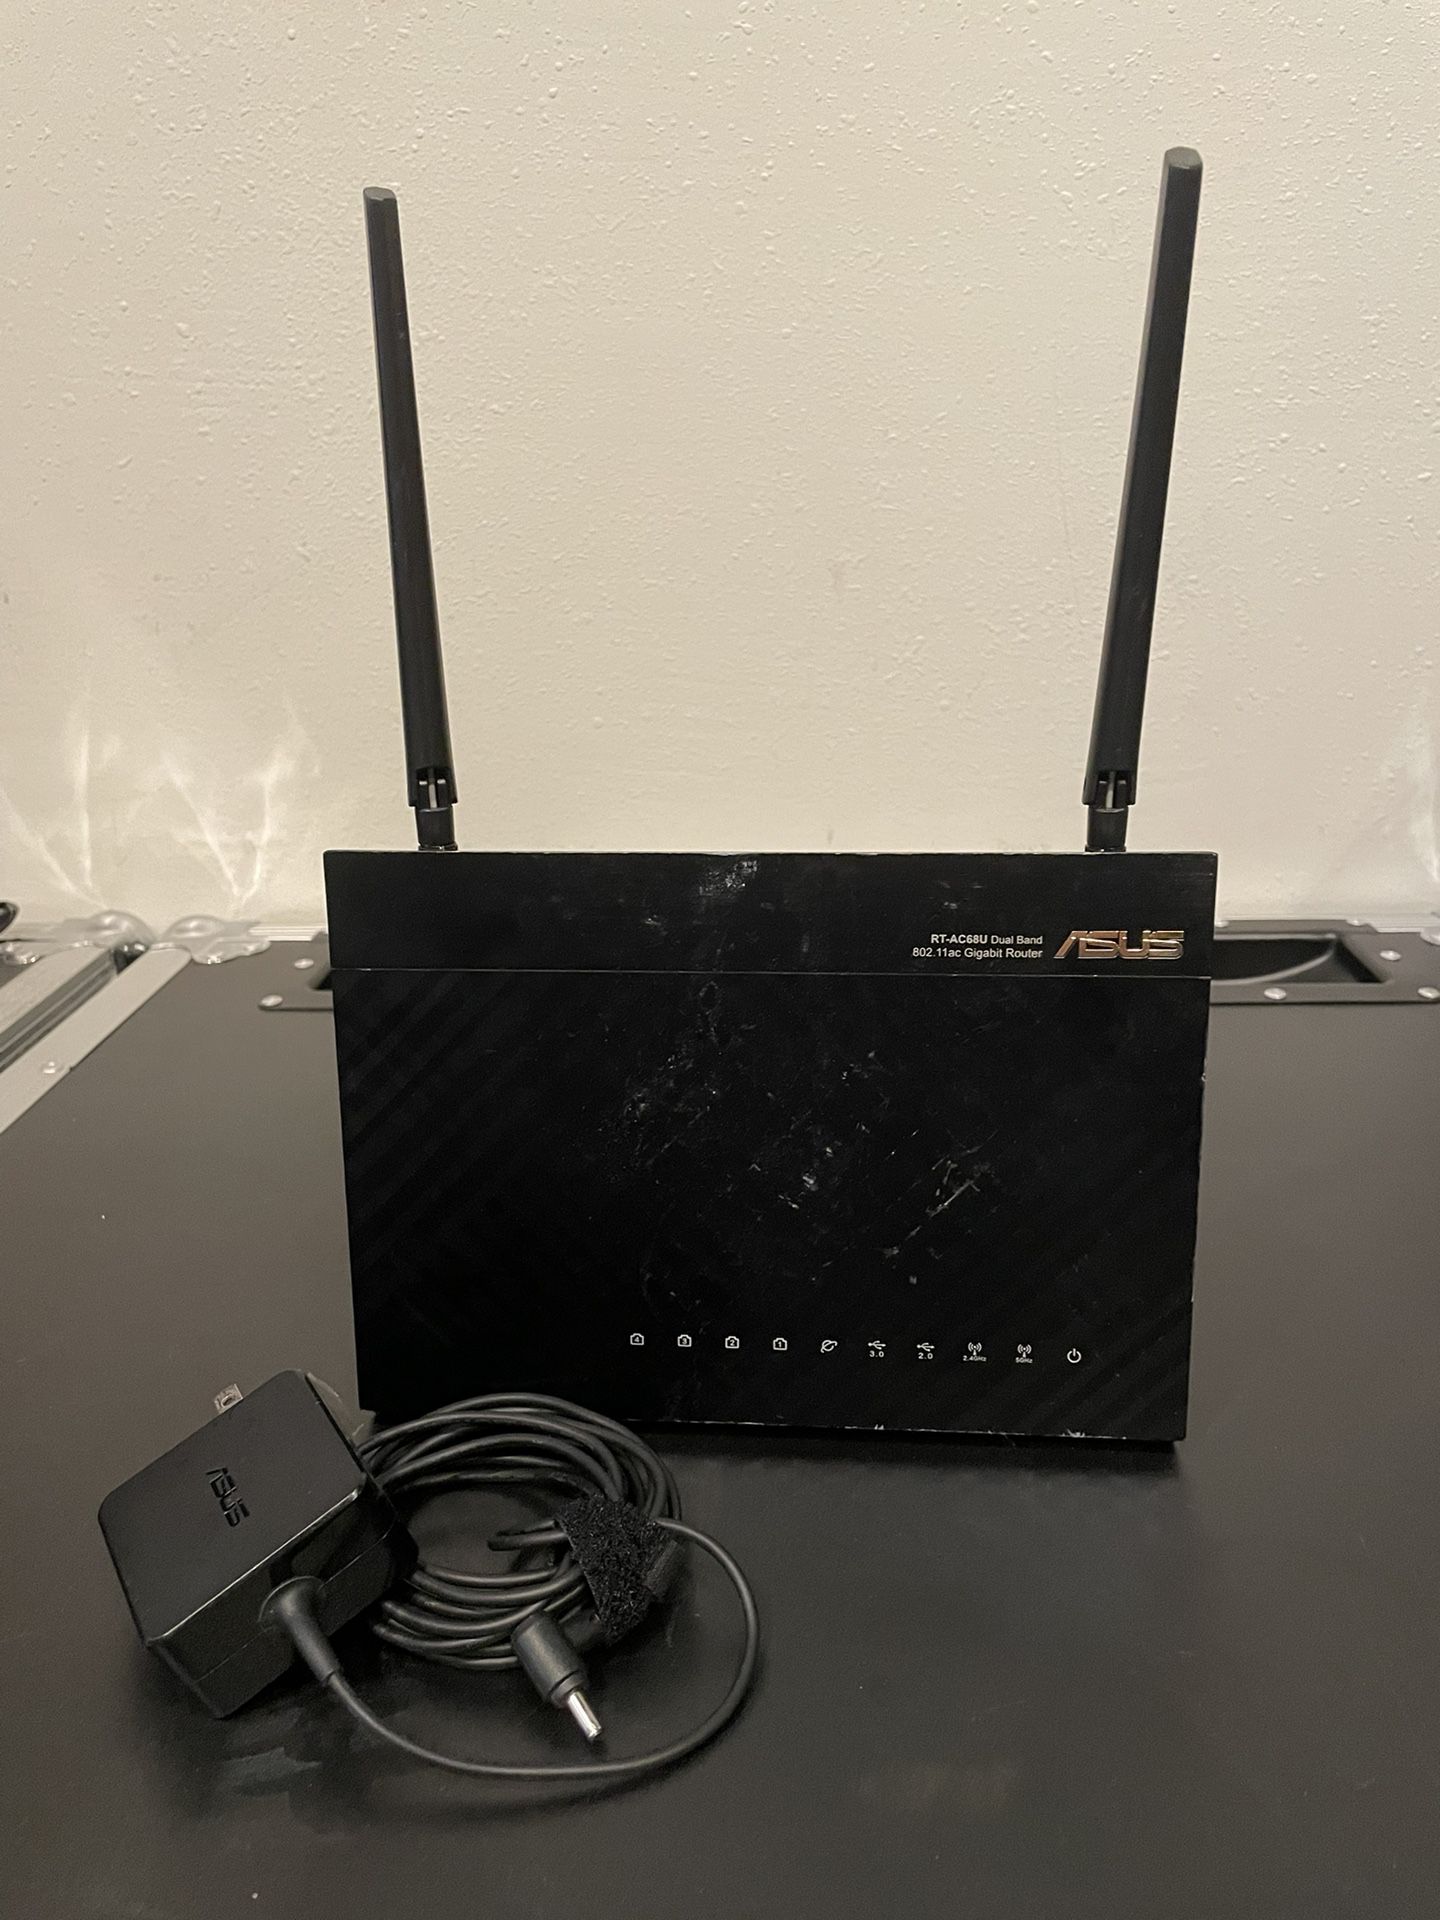 Asus RT-AC68U Router 